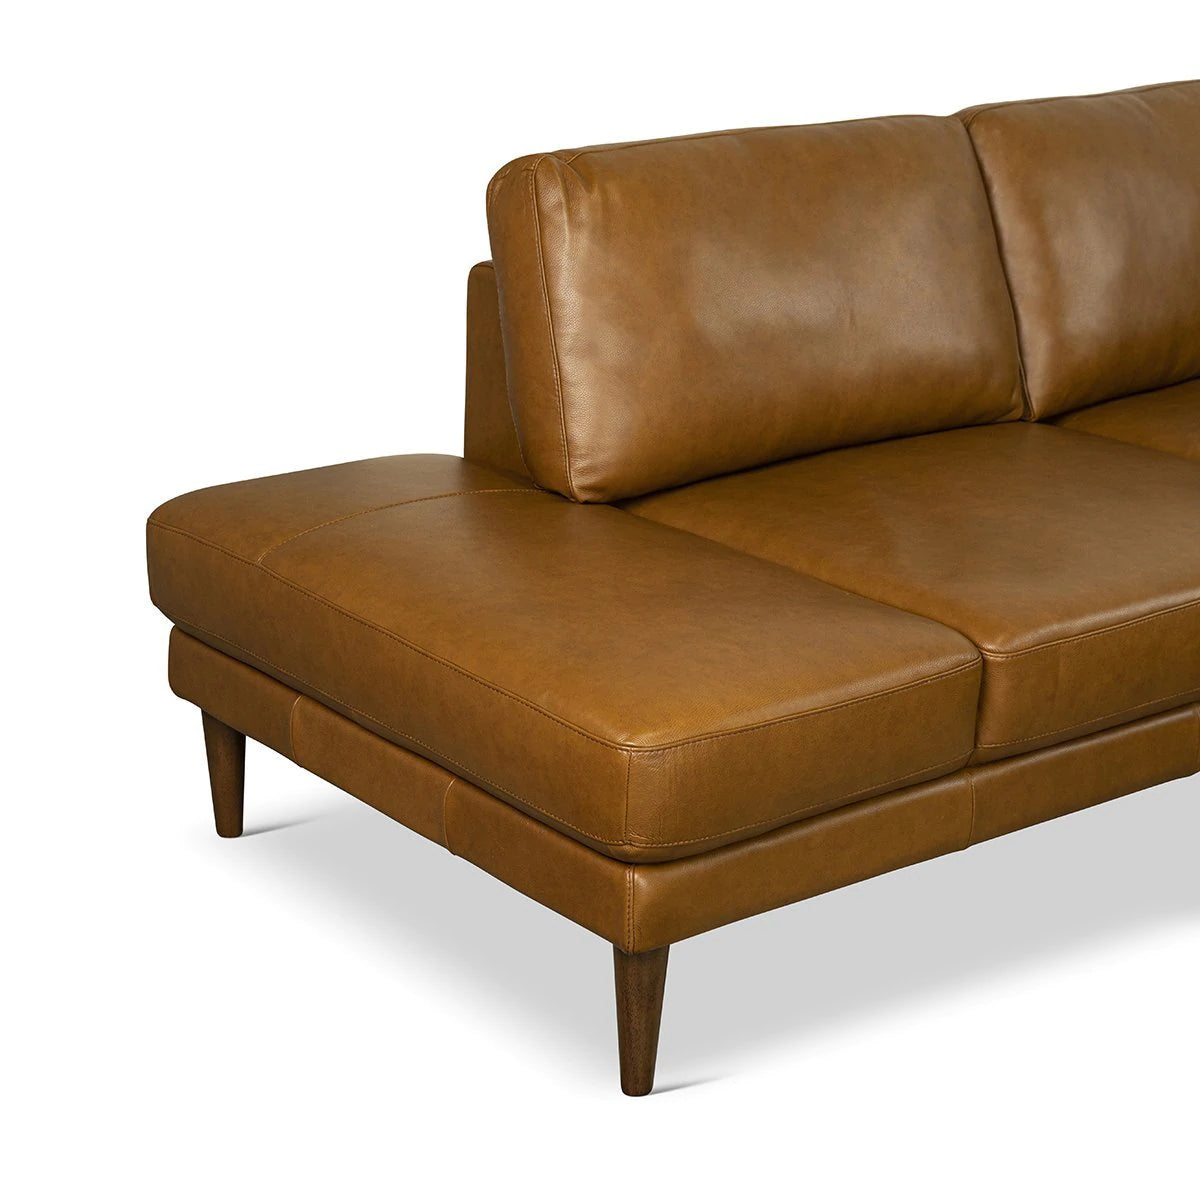 Modern Tan Leather Sectional Sofa - Left Facing Chaise